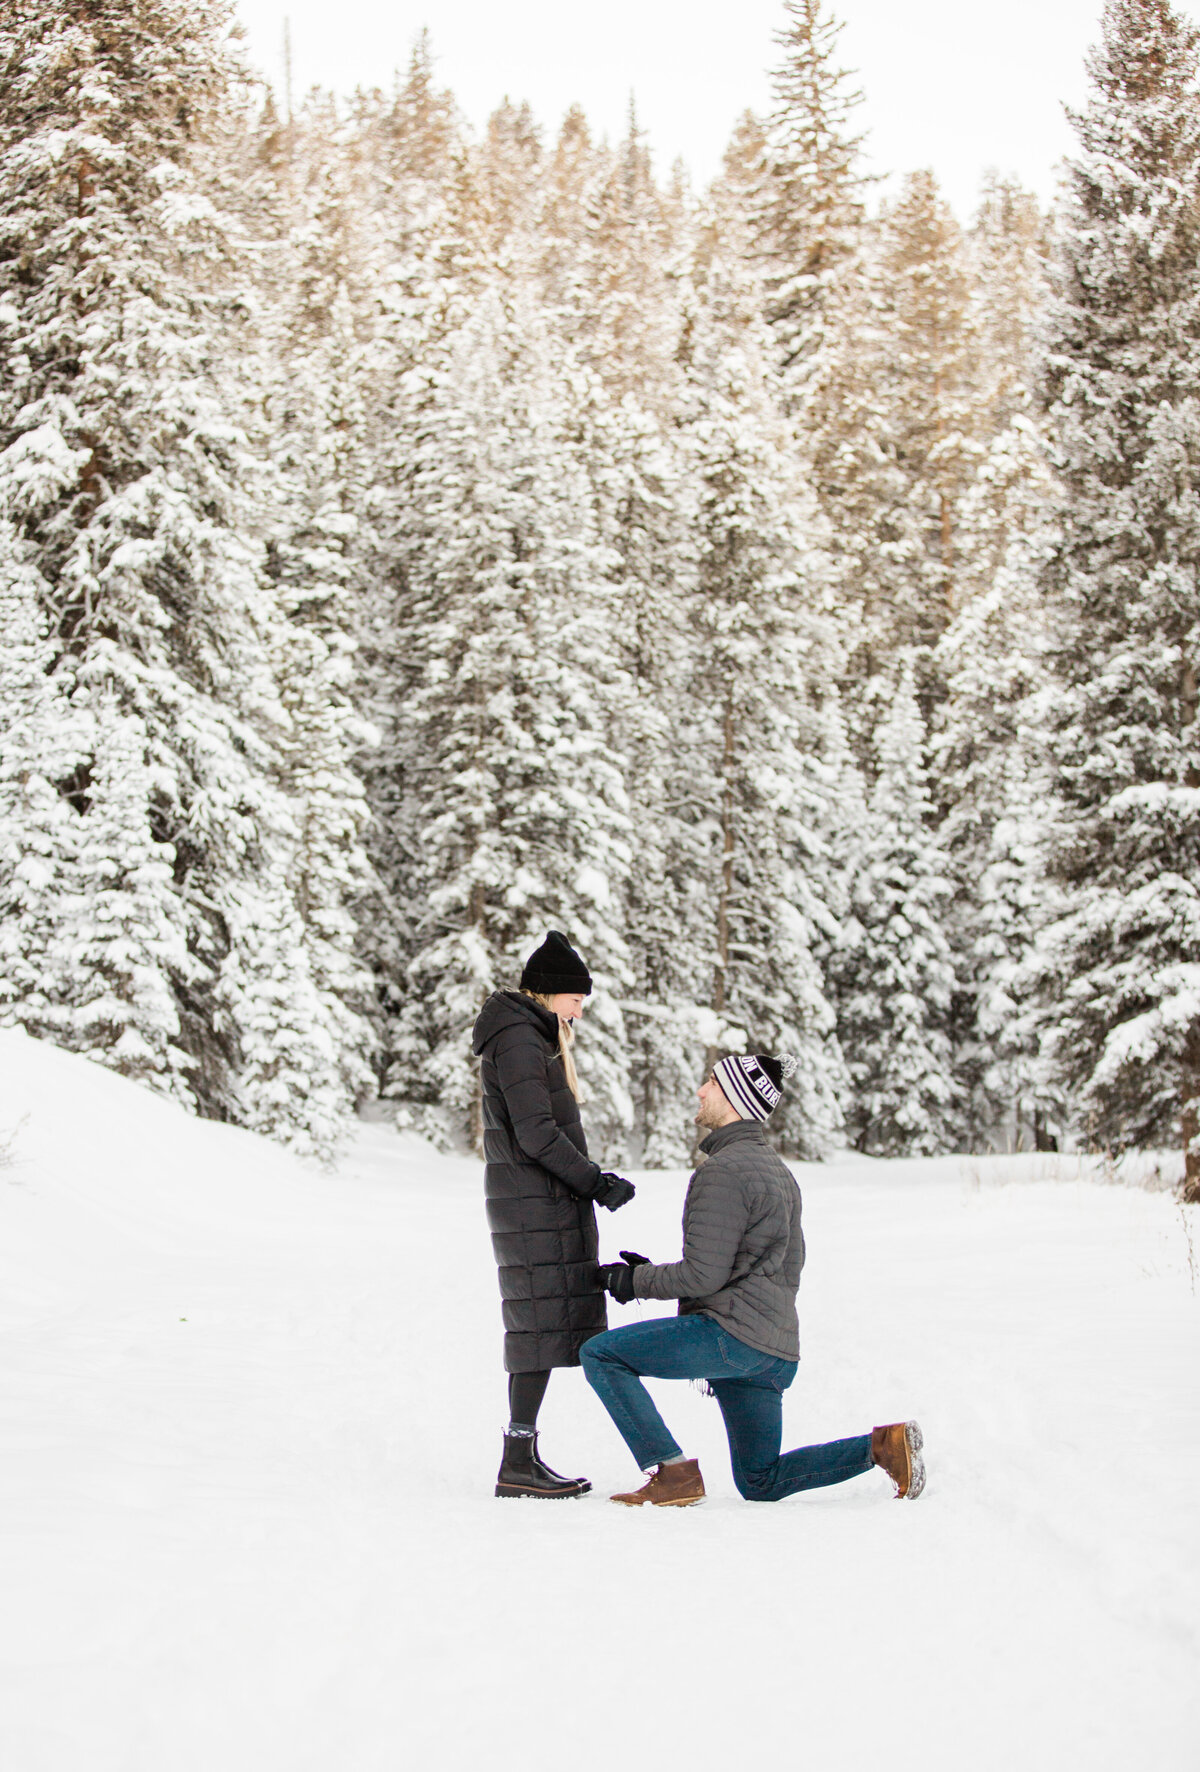 A man is down on one knee proposing to this girlfriend amidst a snowy winter scene